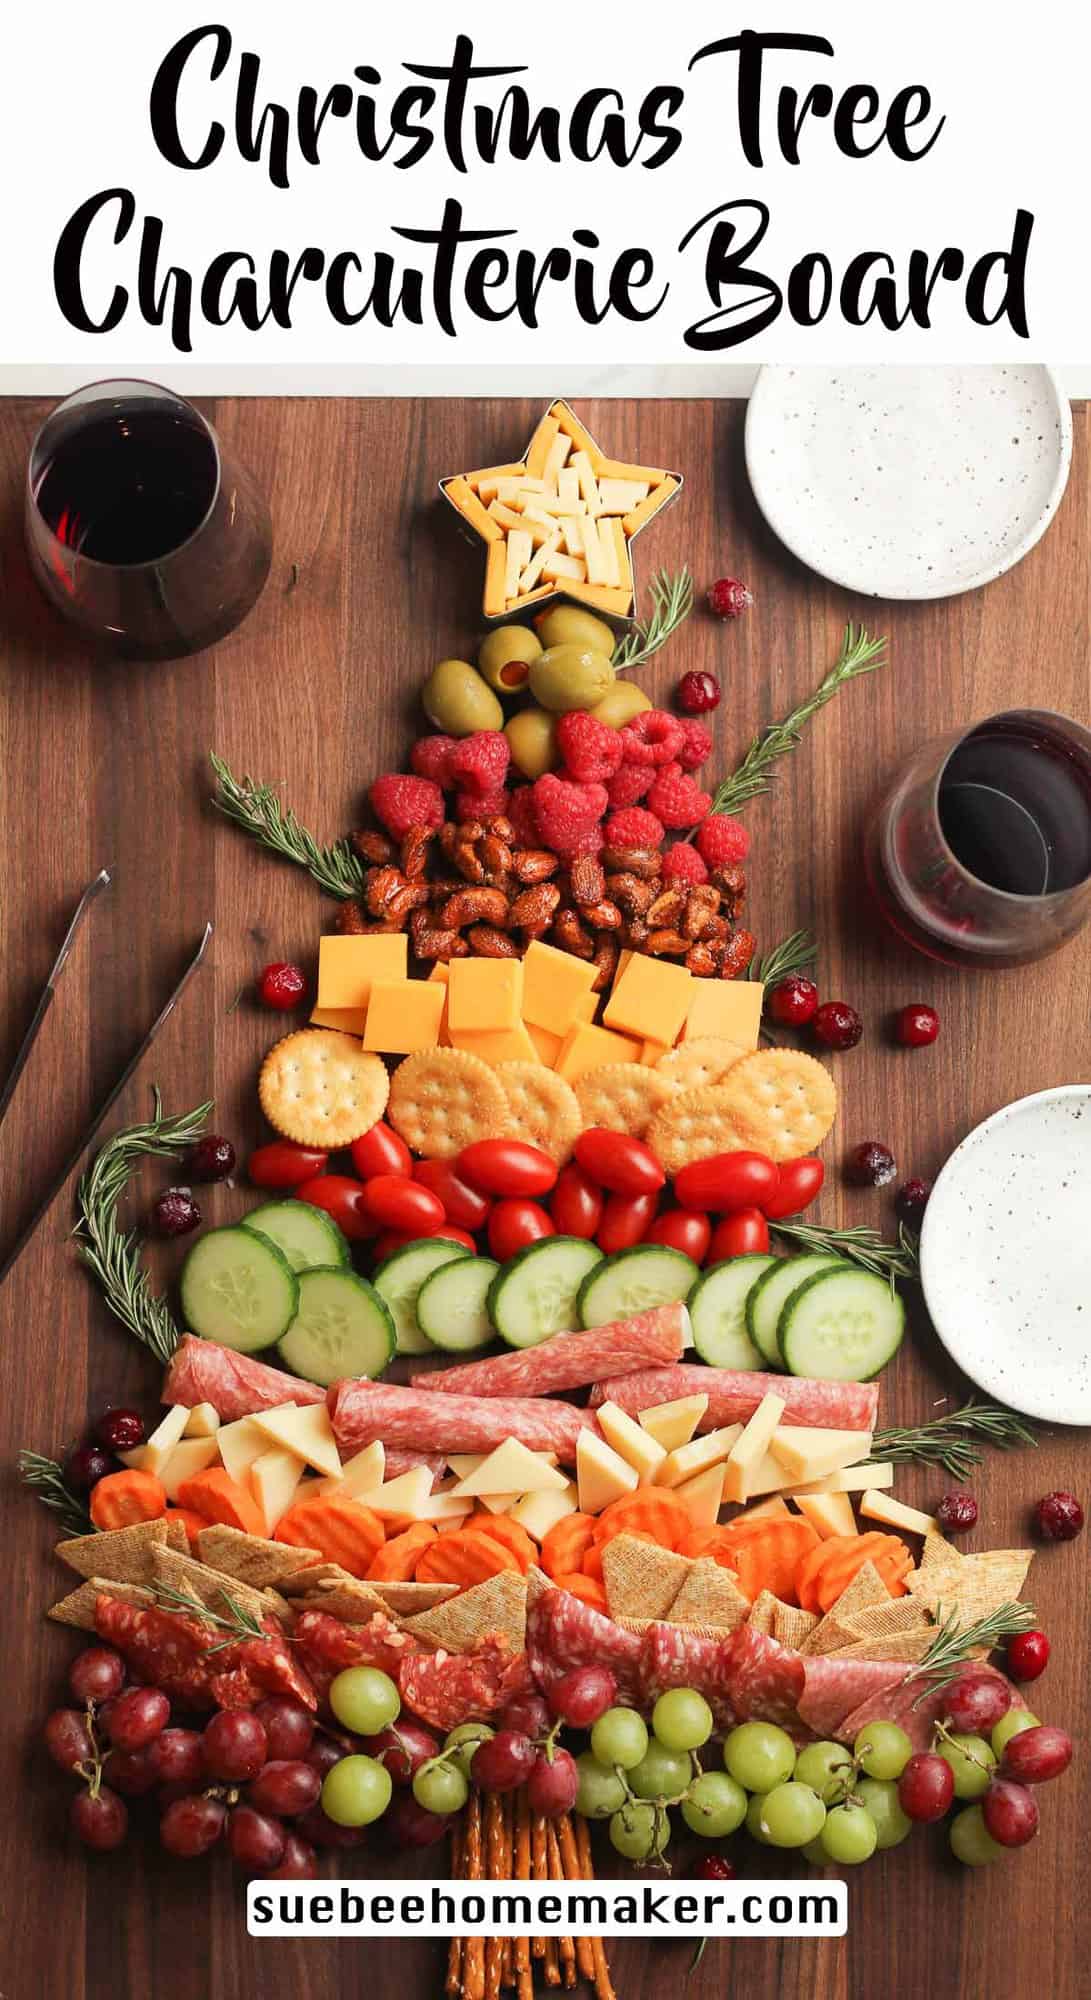 A board with a Christmas tree charcuterie board with small plates and glasses of wine.